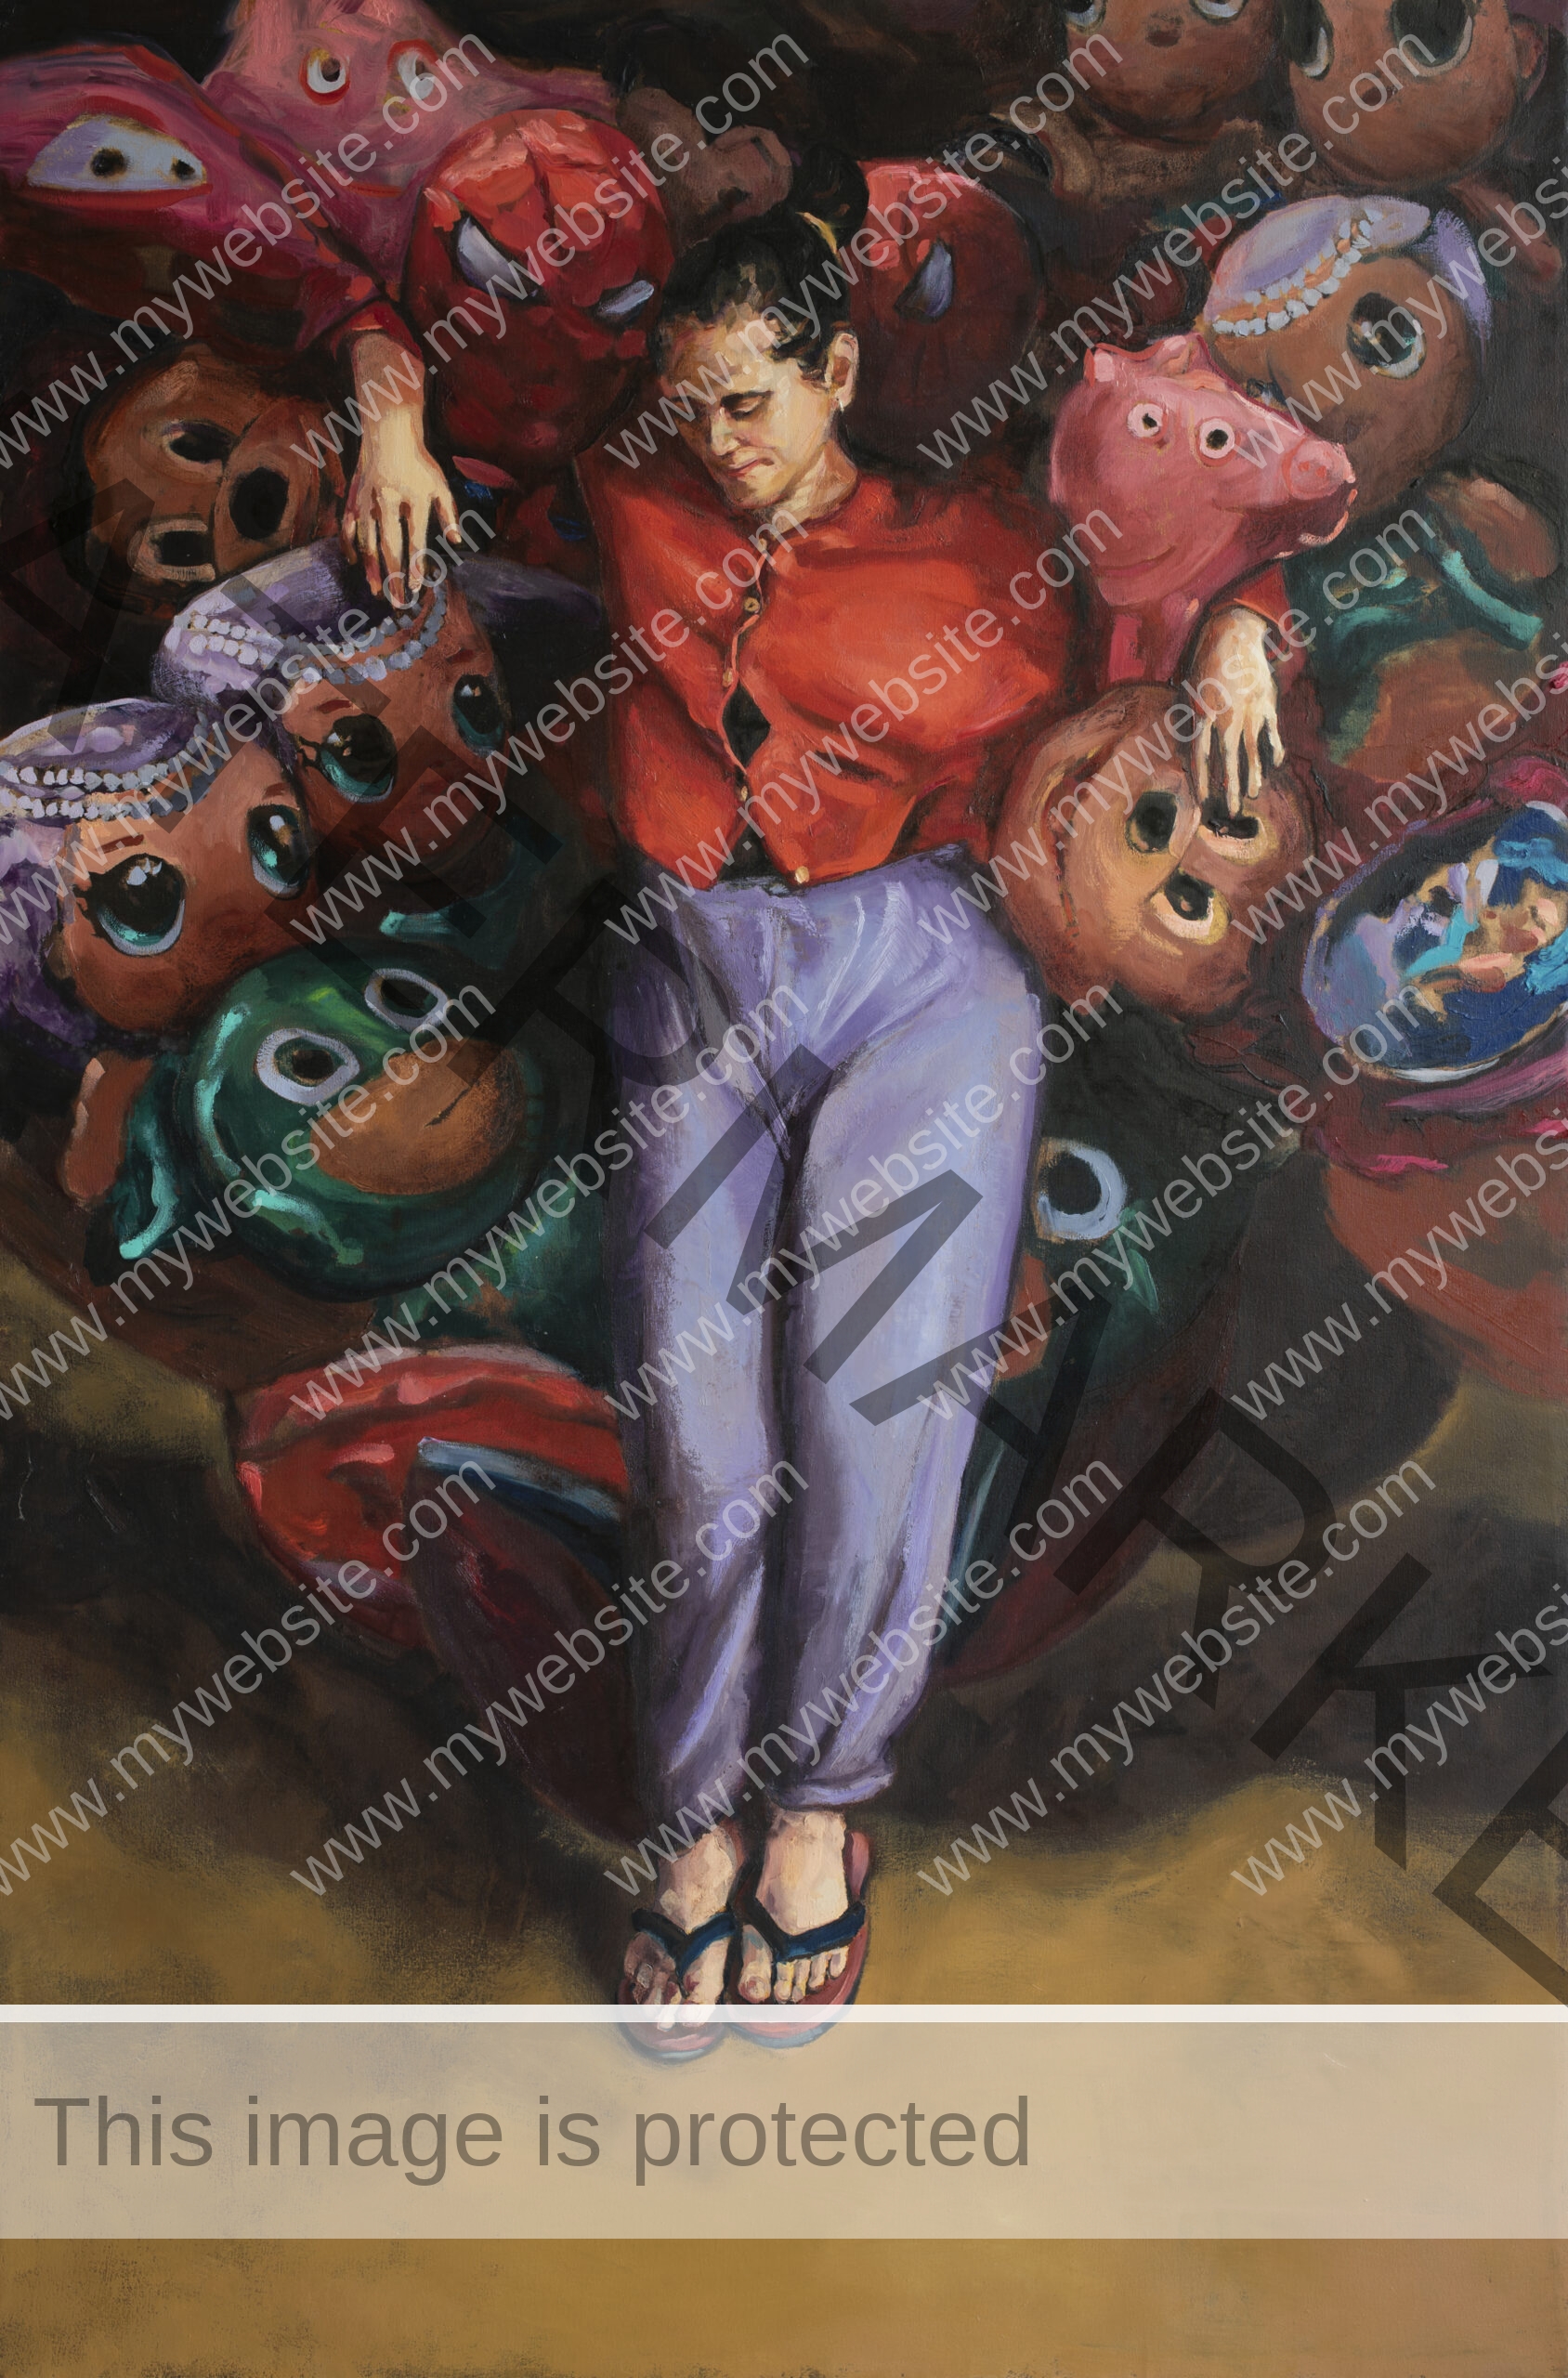 Oil painting of woman holding a bunch of balloons of cartoon characters by Adrián Arguedas contemporary artist.